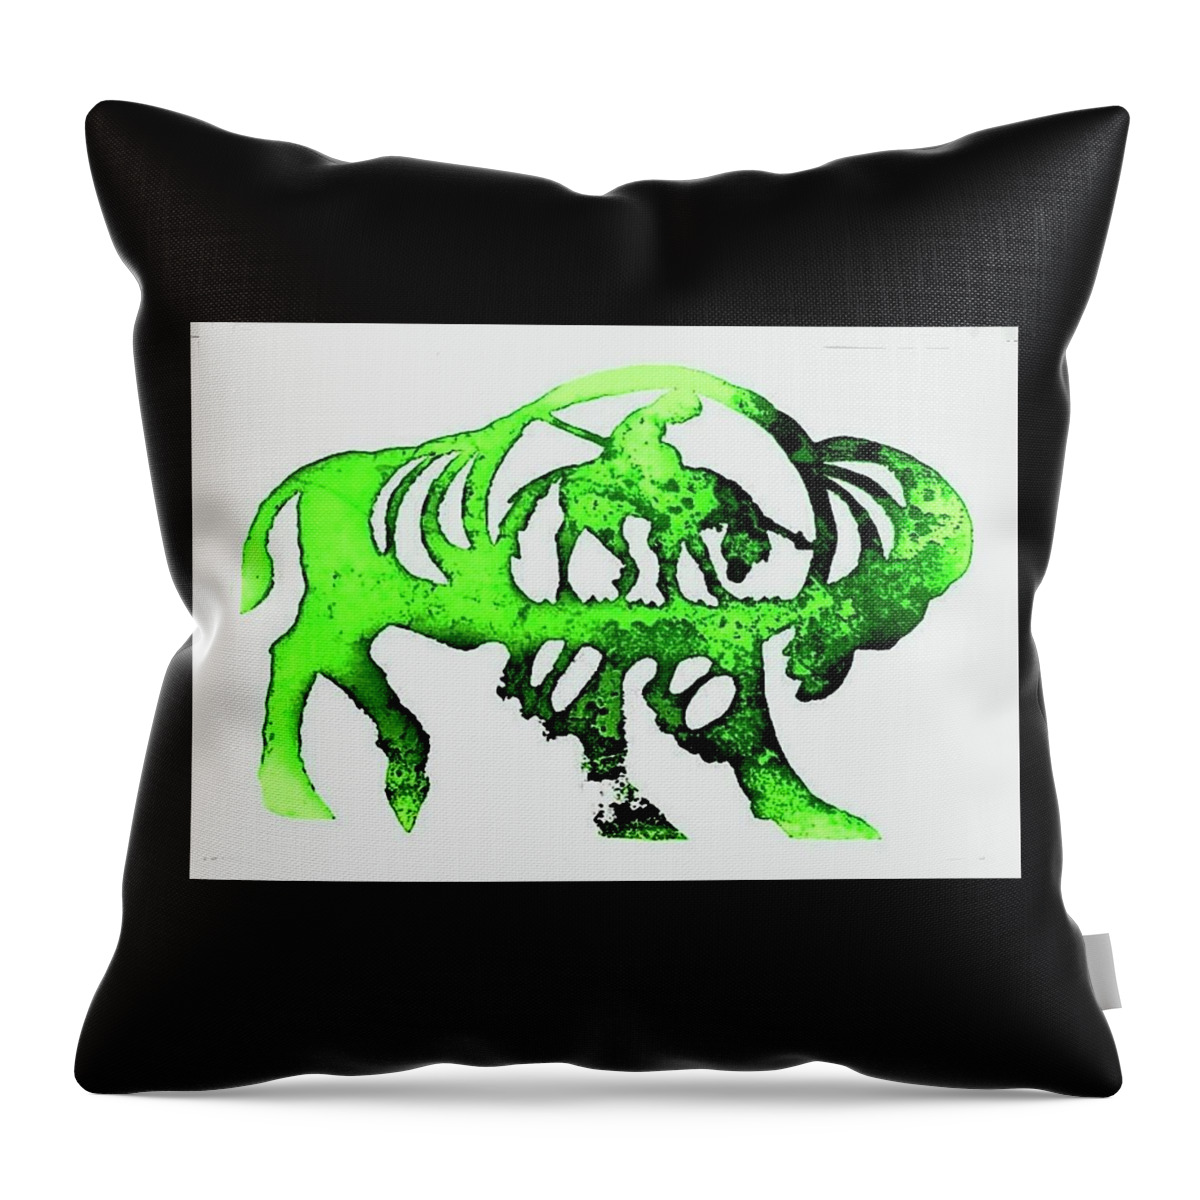 Buffalo Throw Pillow featuring the pyrography Copper Buffalo by Larry Campbell